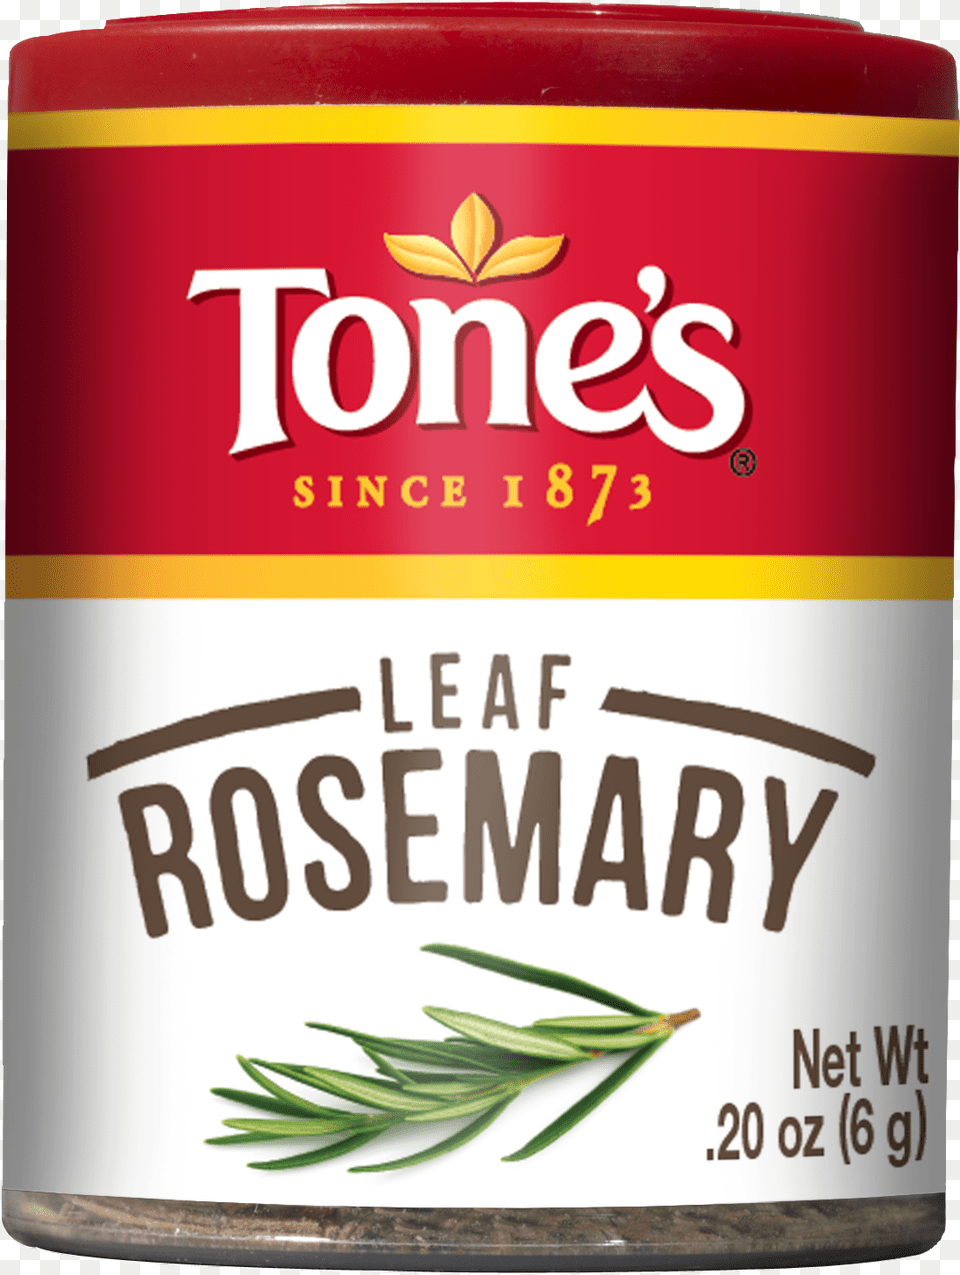 Rosemary Leaf Tin, Aluminium, Can, Canned Goods, Food Png Image